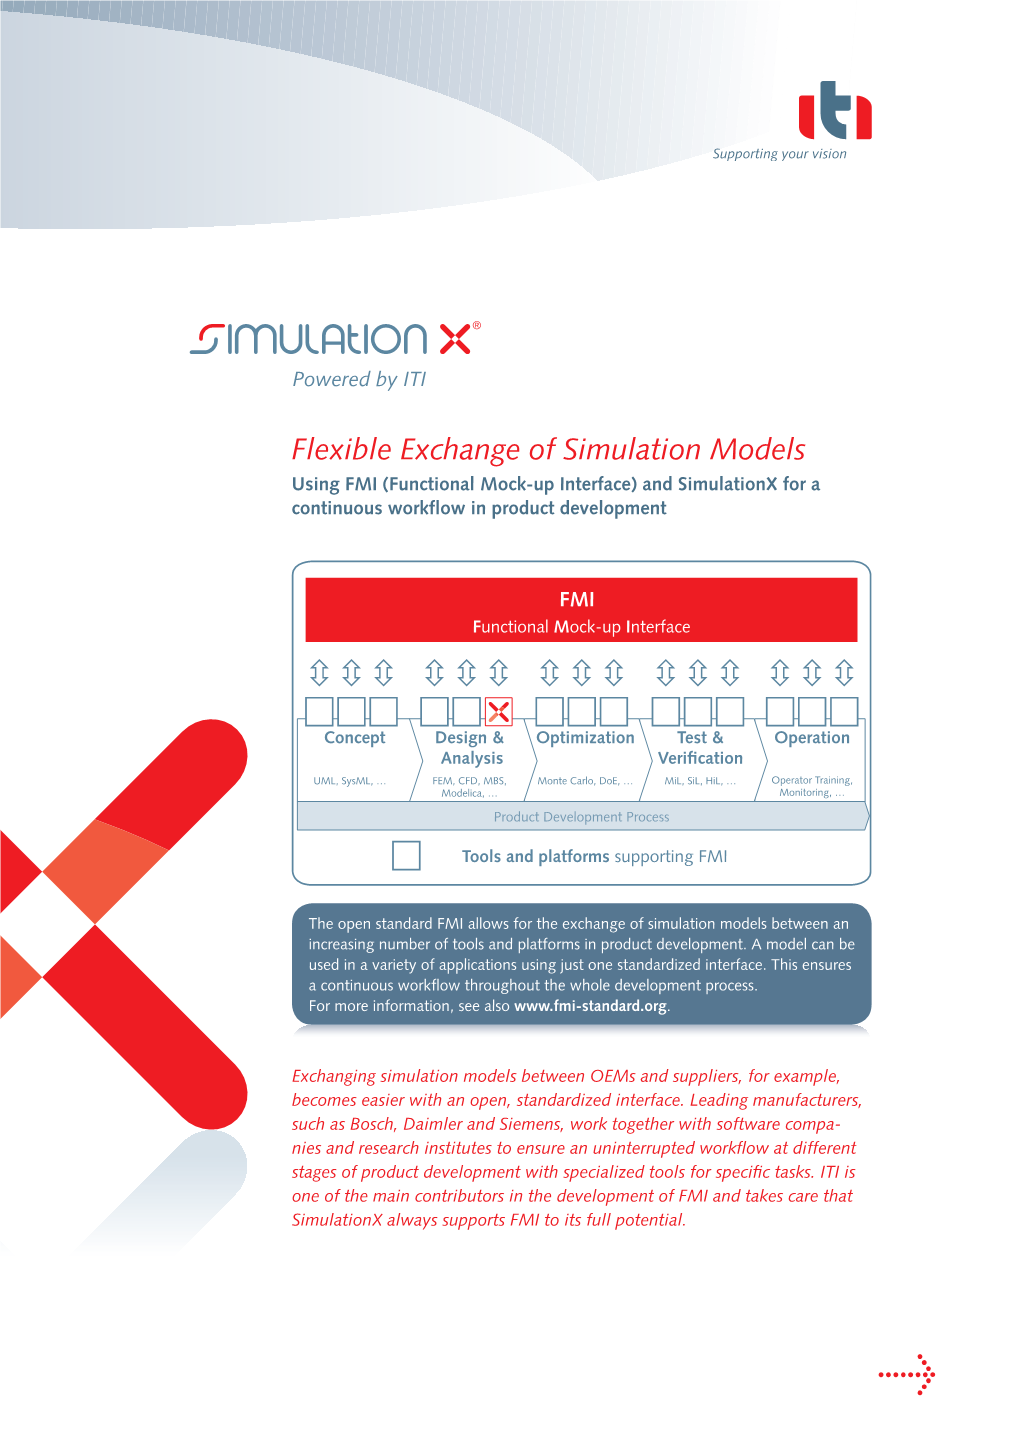 Flexible Exchange of Simulation Models Using FMI (Functional Mock-Up Interface) and Simulationx for a Continuous Workflow in Product Development